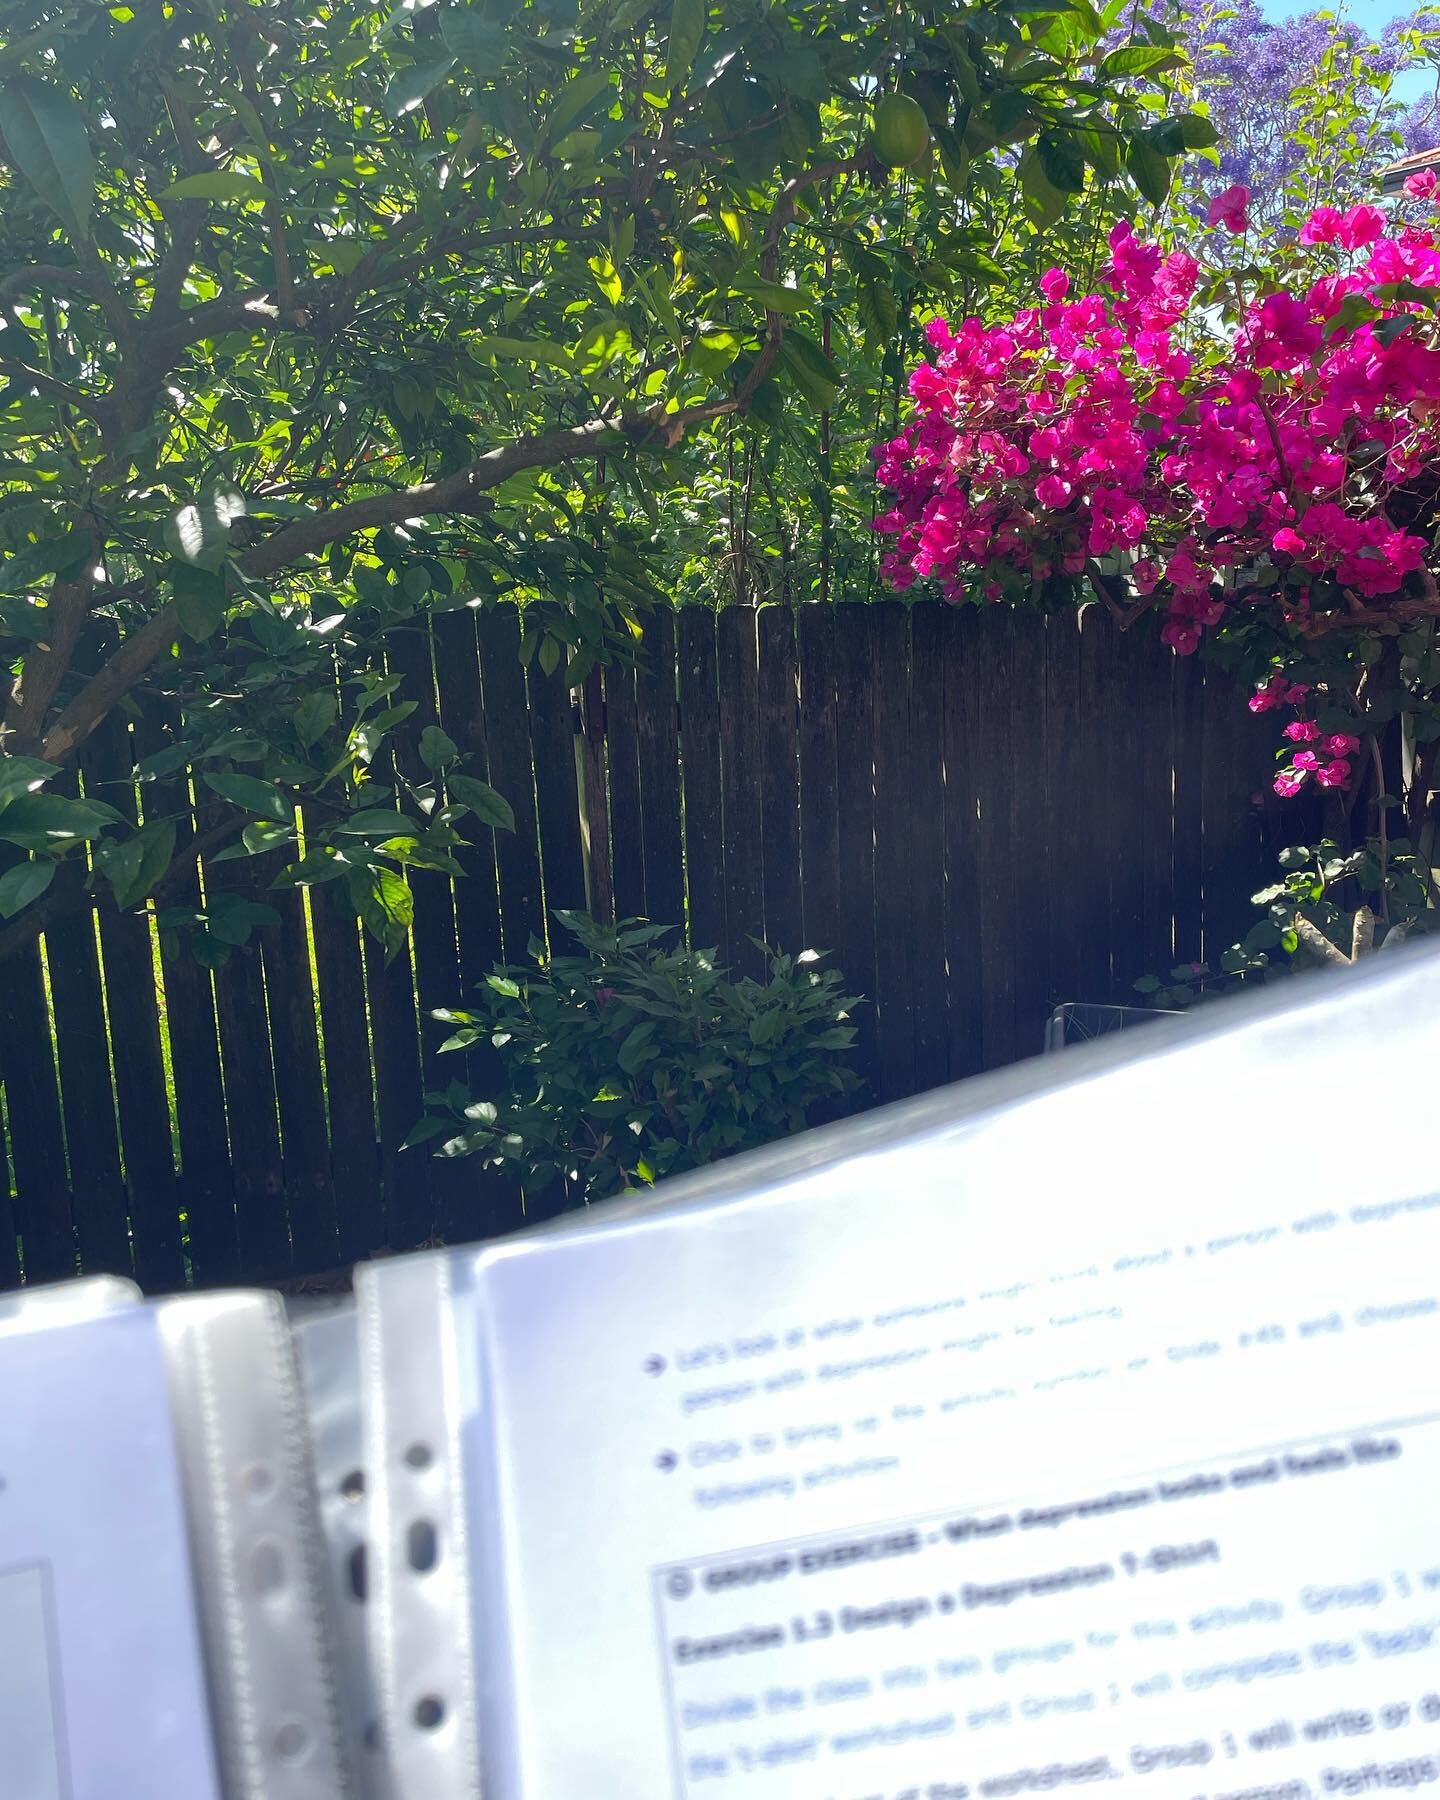 Brushing up on some mental health first aid knowledge for the next course. No better place to do that then in the sunshine surrounded by flowers 🌸 
#mhfa #sydneyaustralia #springtime #mentalhealth